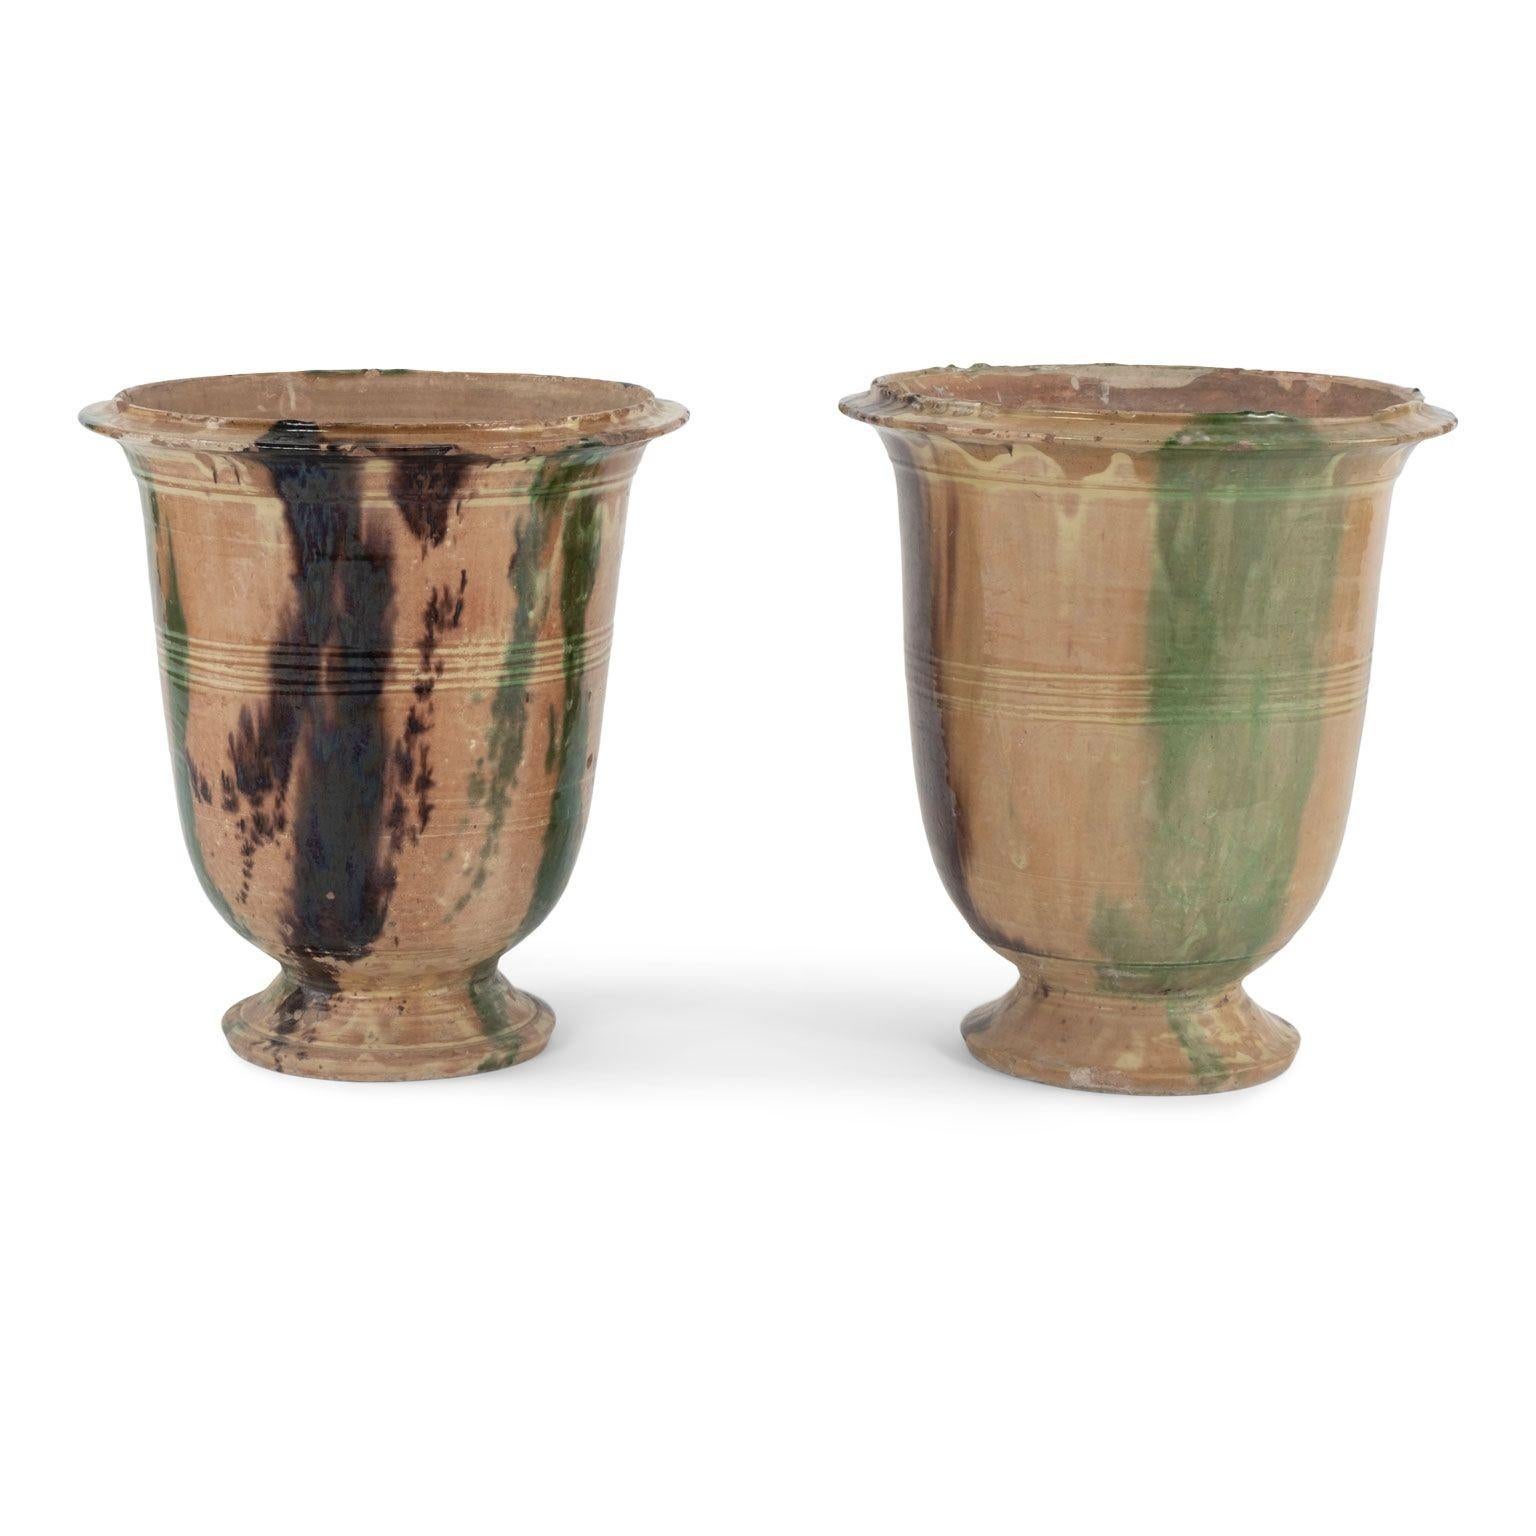 Pair of Petite Anduze jars in tricolor brown, green and yellow glaze, circa 1900-1939. Suitable for outdoor use, or indoors on floor or table top.
1st jar measures 16.75 inches high x 15.25 inches diameter
2nd jar measures: 16.5 inches high x 15